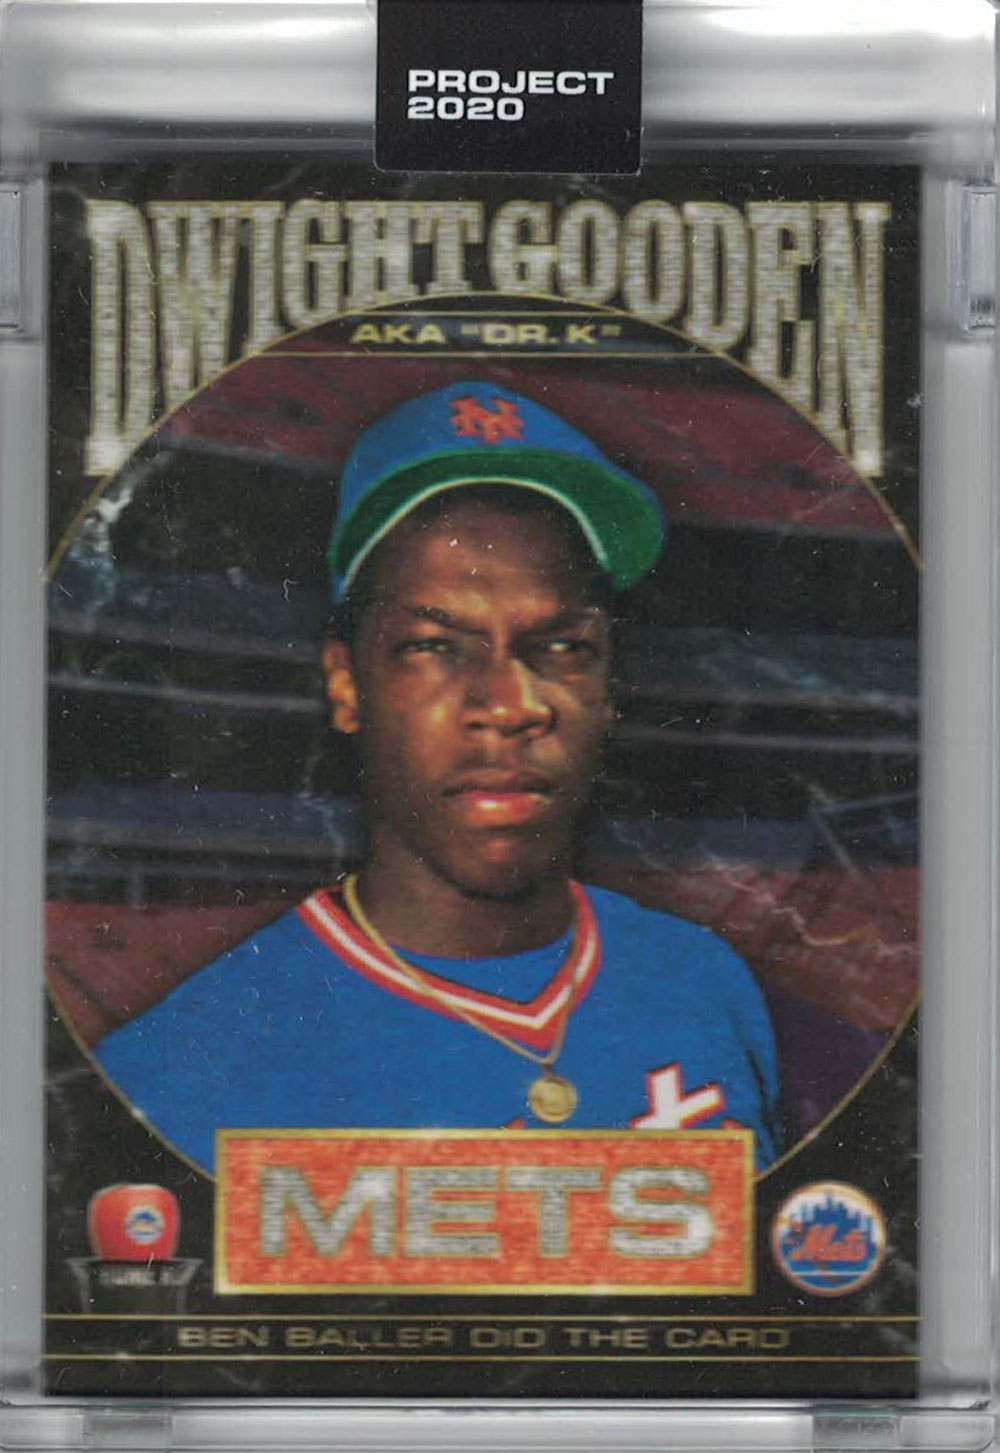 Dwight Gooden New York Mets 2020 Topps Project #86 Artist Trading Card 28932